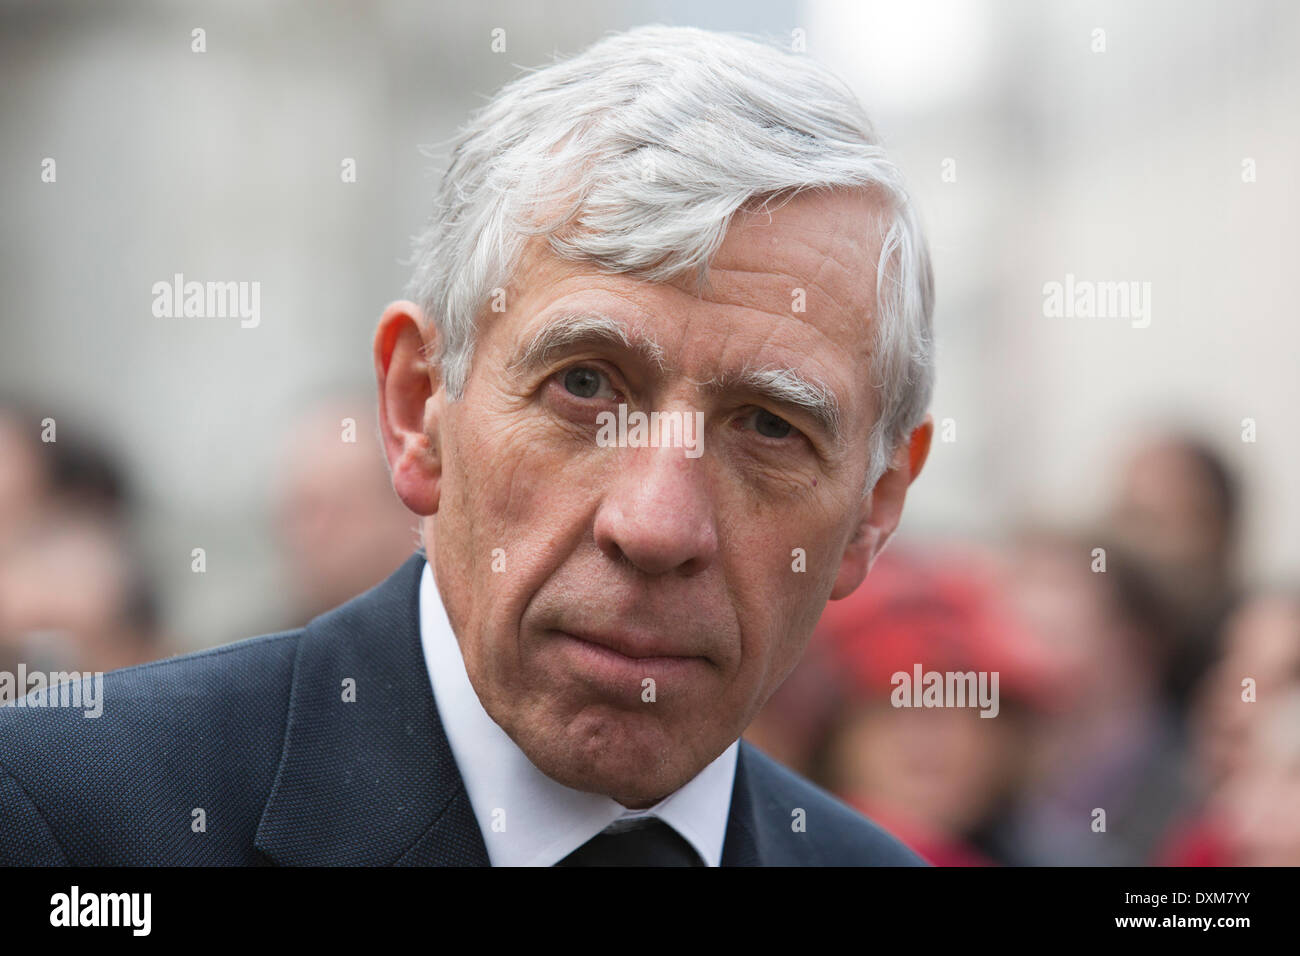 London, UK. 27 March 2014. Labour Party politican Jack Straw, former Foreign Secretary. Funeral service of Labour Politician Tony Benn at St Margaret's Church, Westminster Abbey, London, UK. Photo: Nick Savage/Alamy Live News Stock Photo